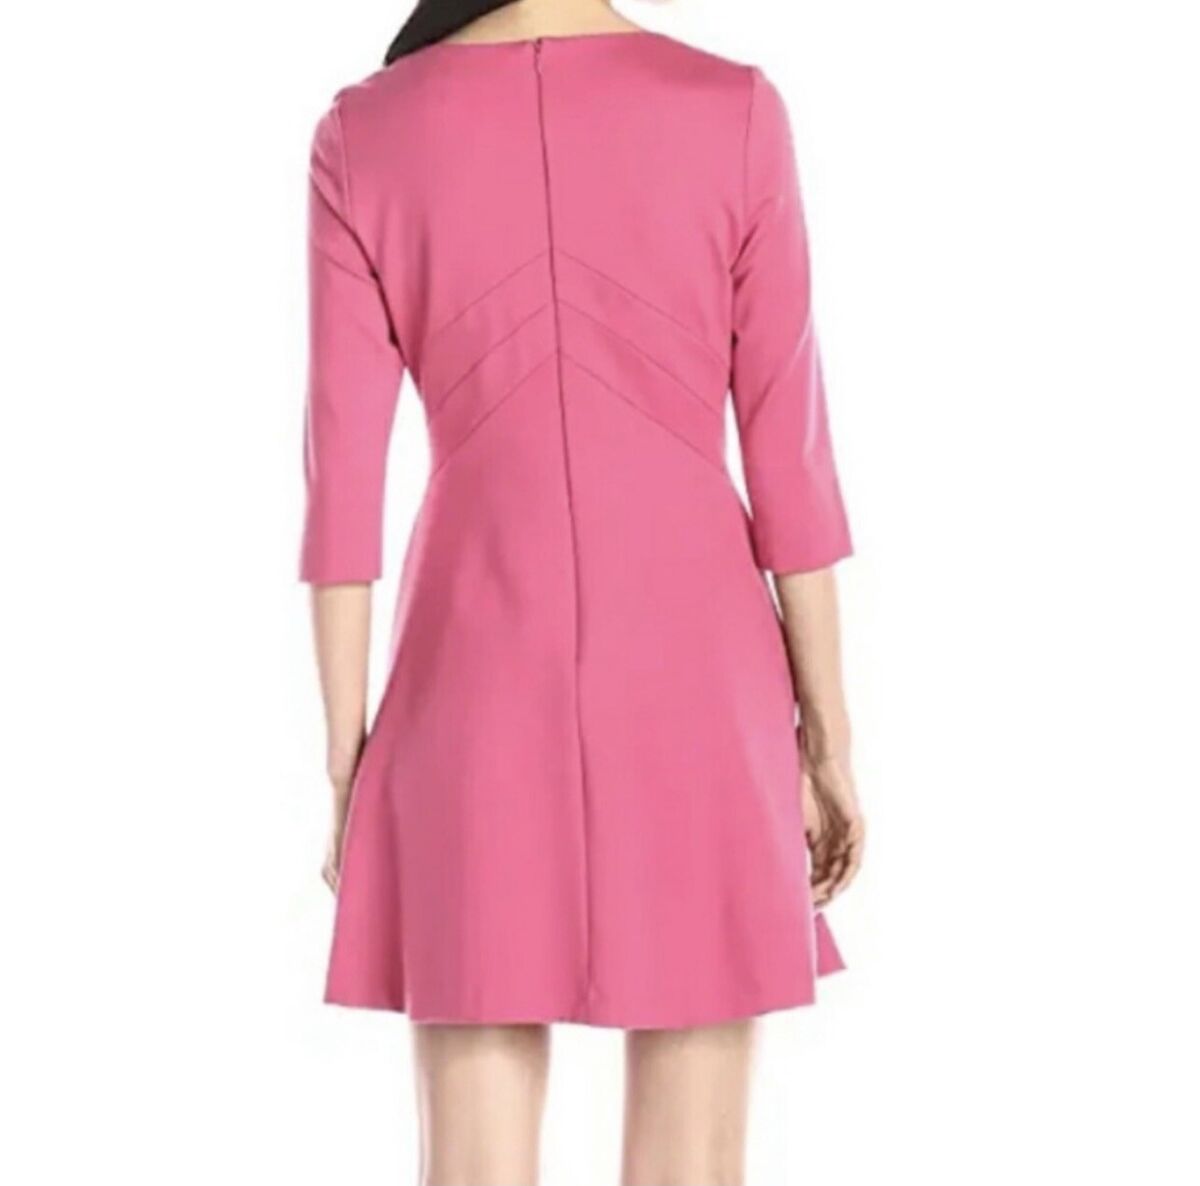 adrianna papell solid ponte a line dress pink size 8 new